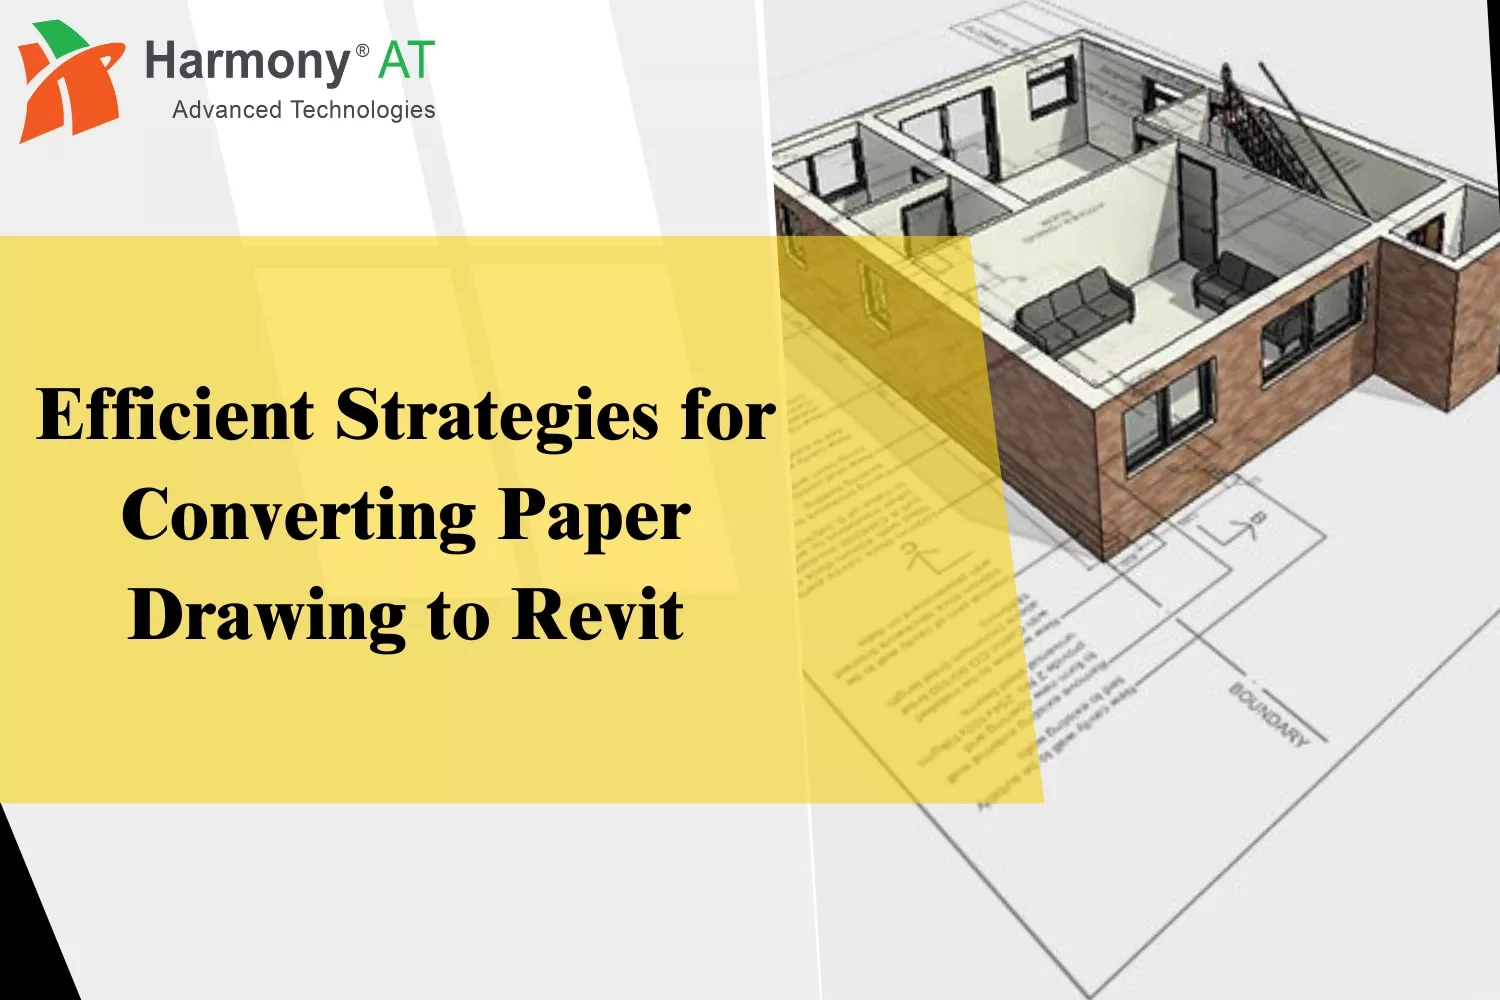 Convert paper drawing to Revit